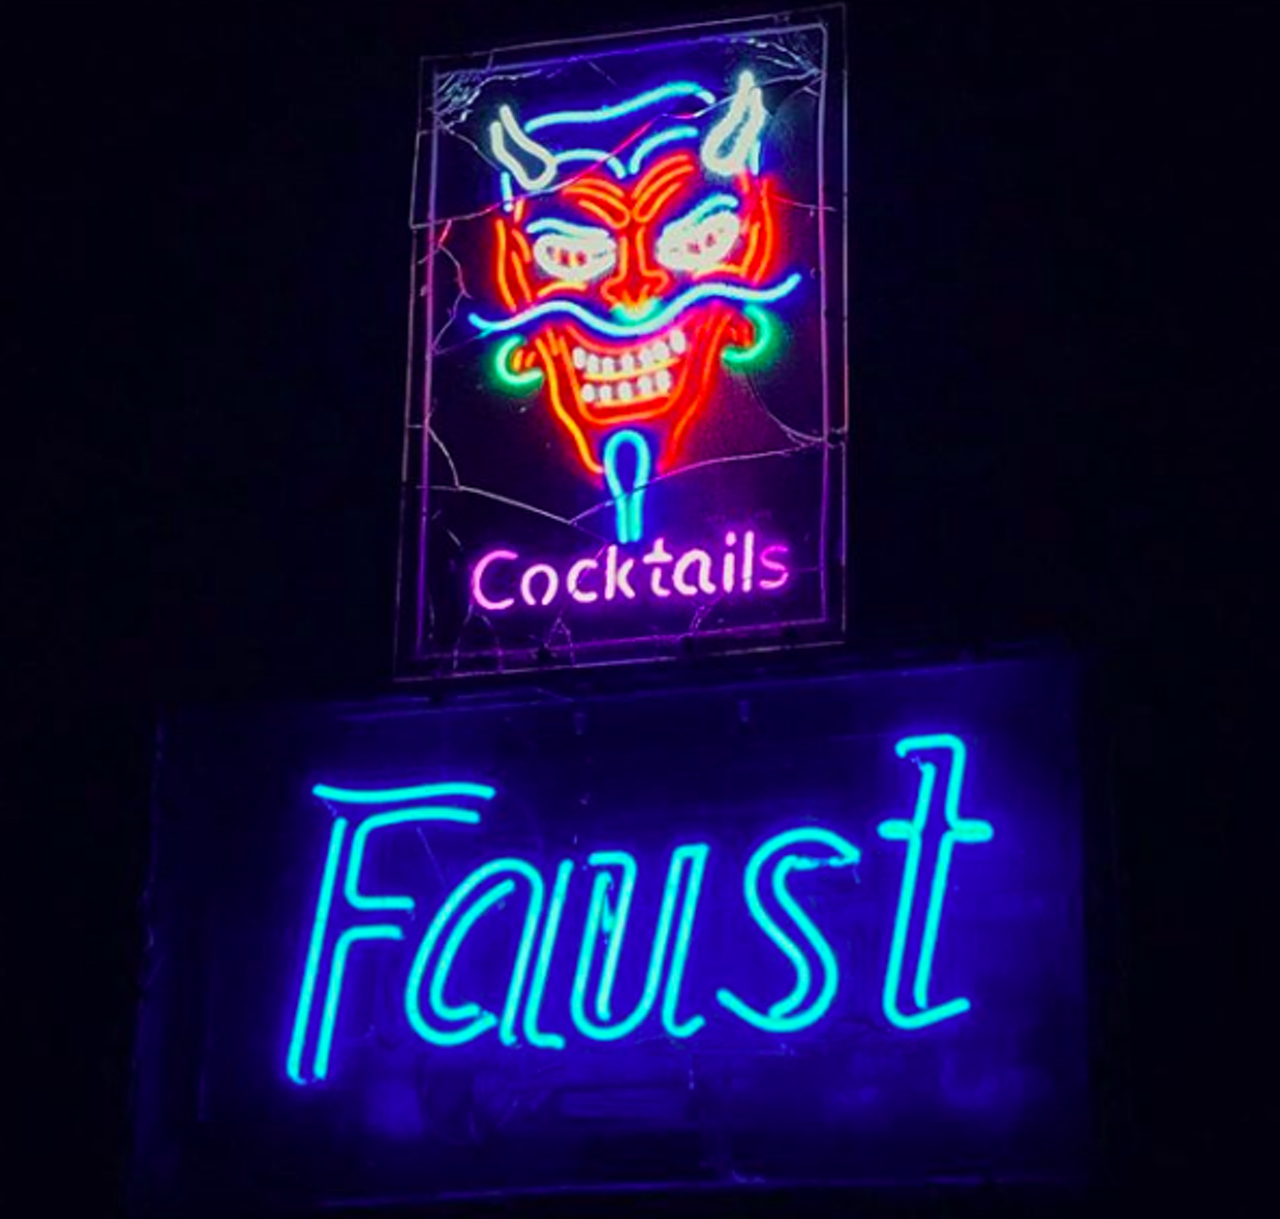 Faust Tavern
517 E Woodlawn Ave, (210) 257-0628, facebook.com/TheFaustTavern
With a rock feel to it, Faust should take pride in being the no-fucks-given spot of the St. Mary’s Strip. If you’re looking for a surprisingly romantic spot, grab a few beers (or cocktails) and take your boo to the back patio with the two-seater picnic tables. We can’t think of anything more intimate than that, paired with cigarette smoke and metal playing in the distance.
Photo via Instagram / drdithers